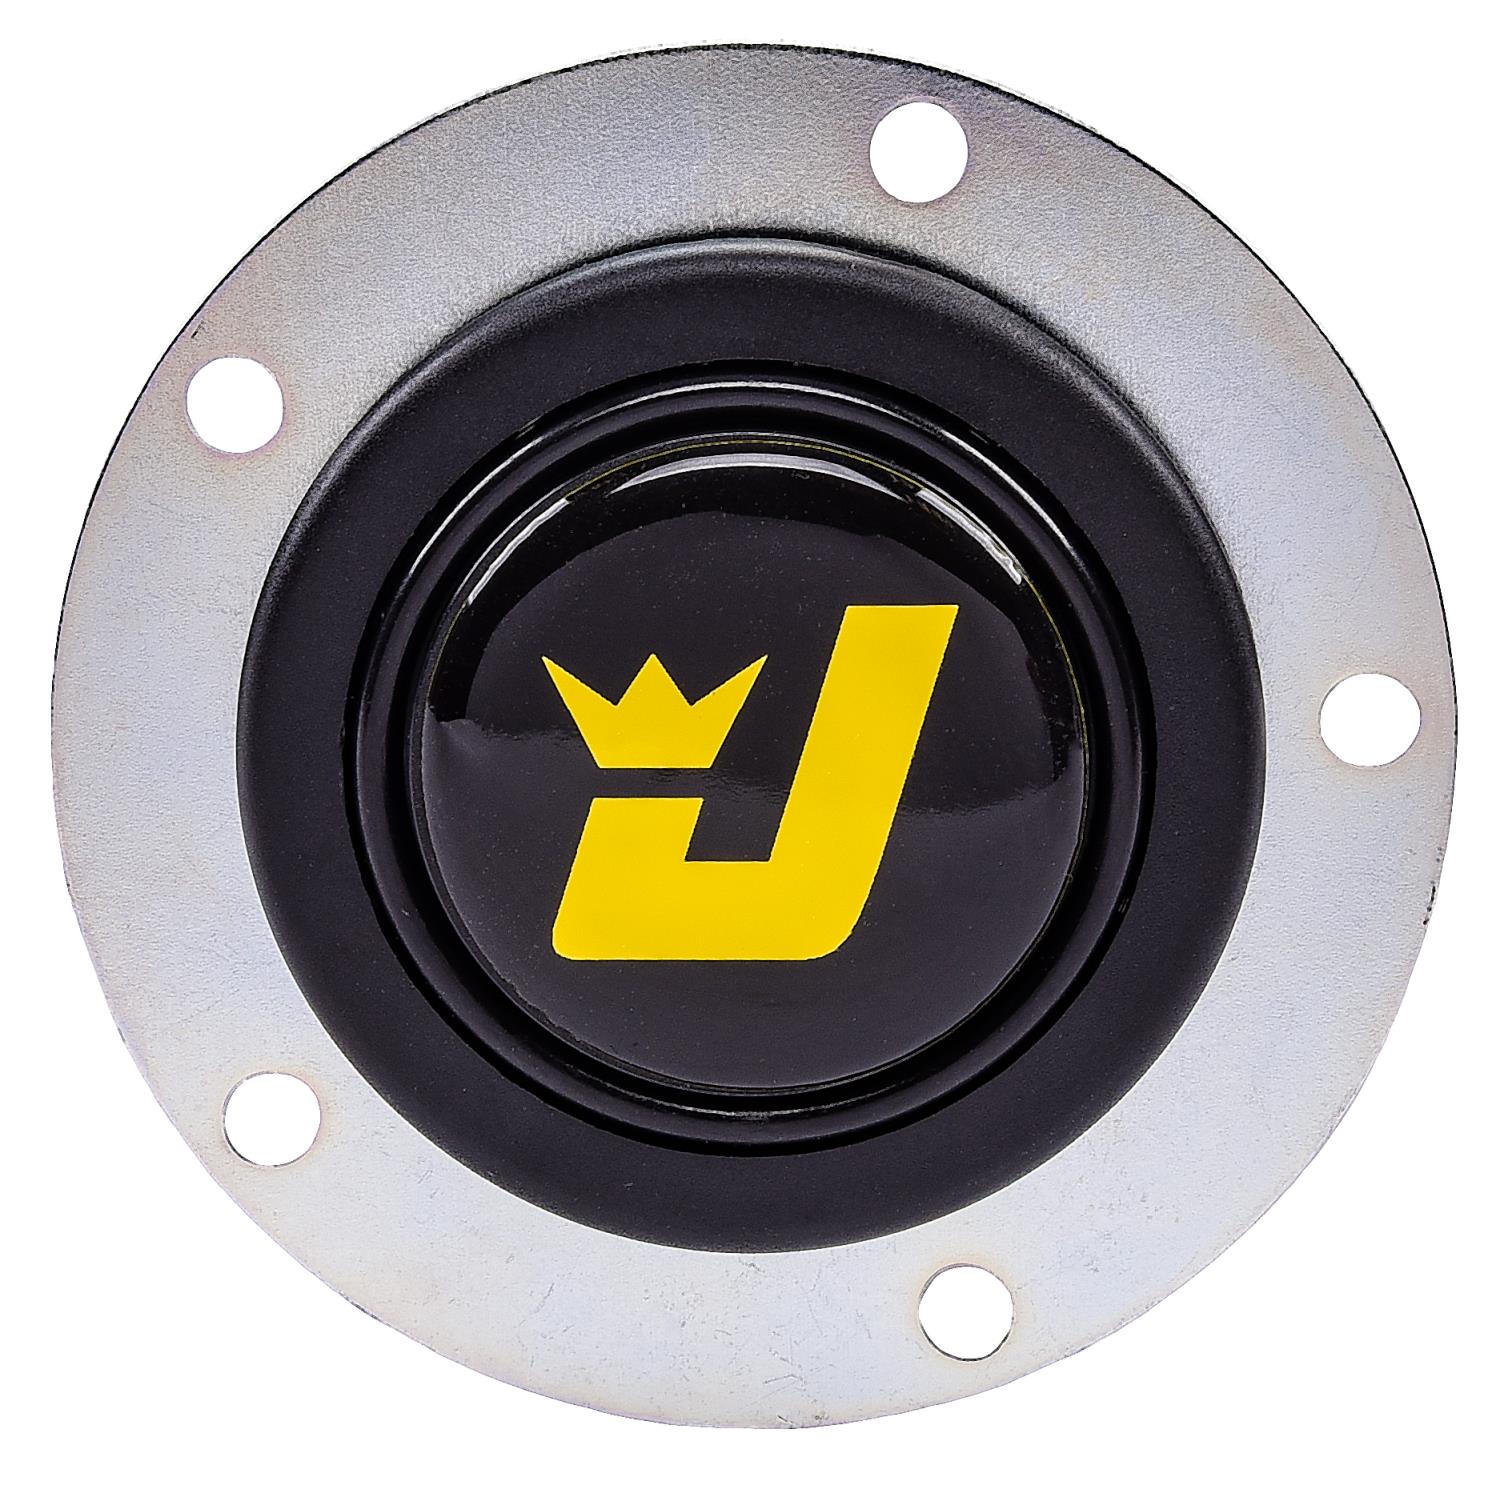 Horn Button Kit for JEGS Premium Racing Steering Wheels